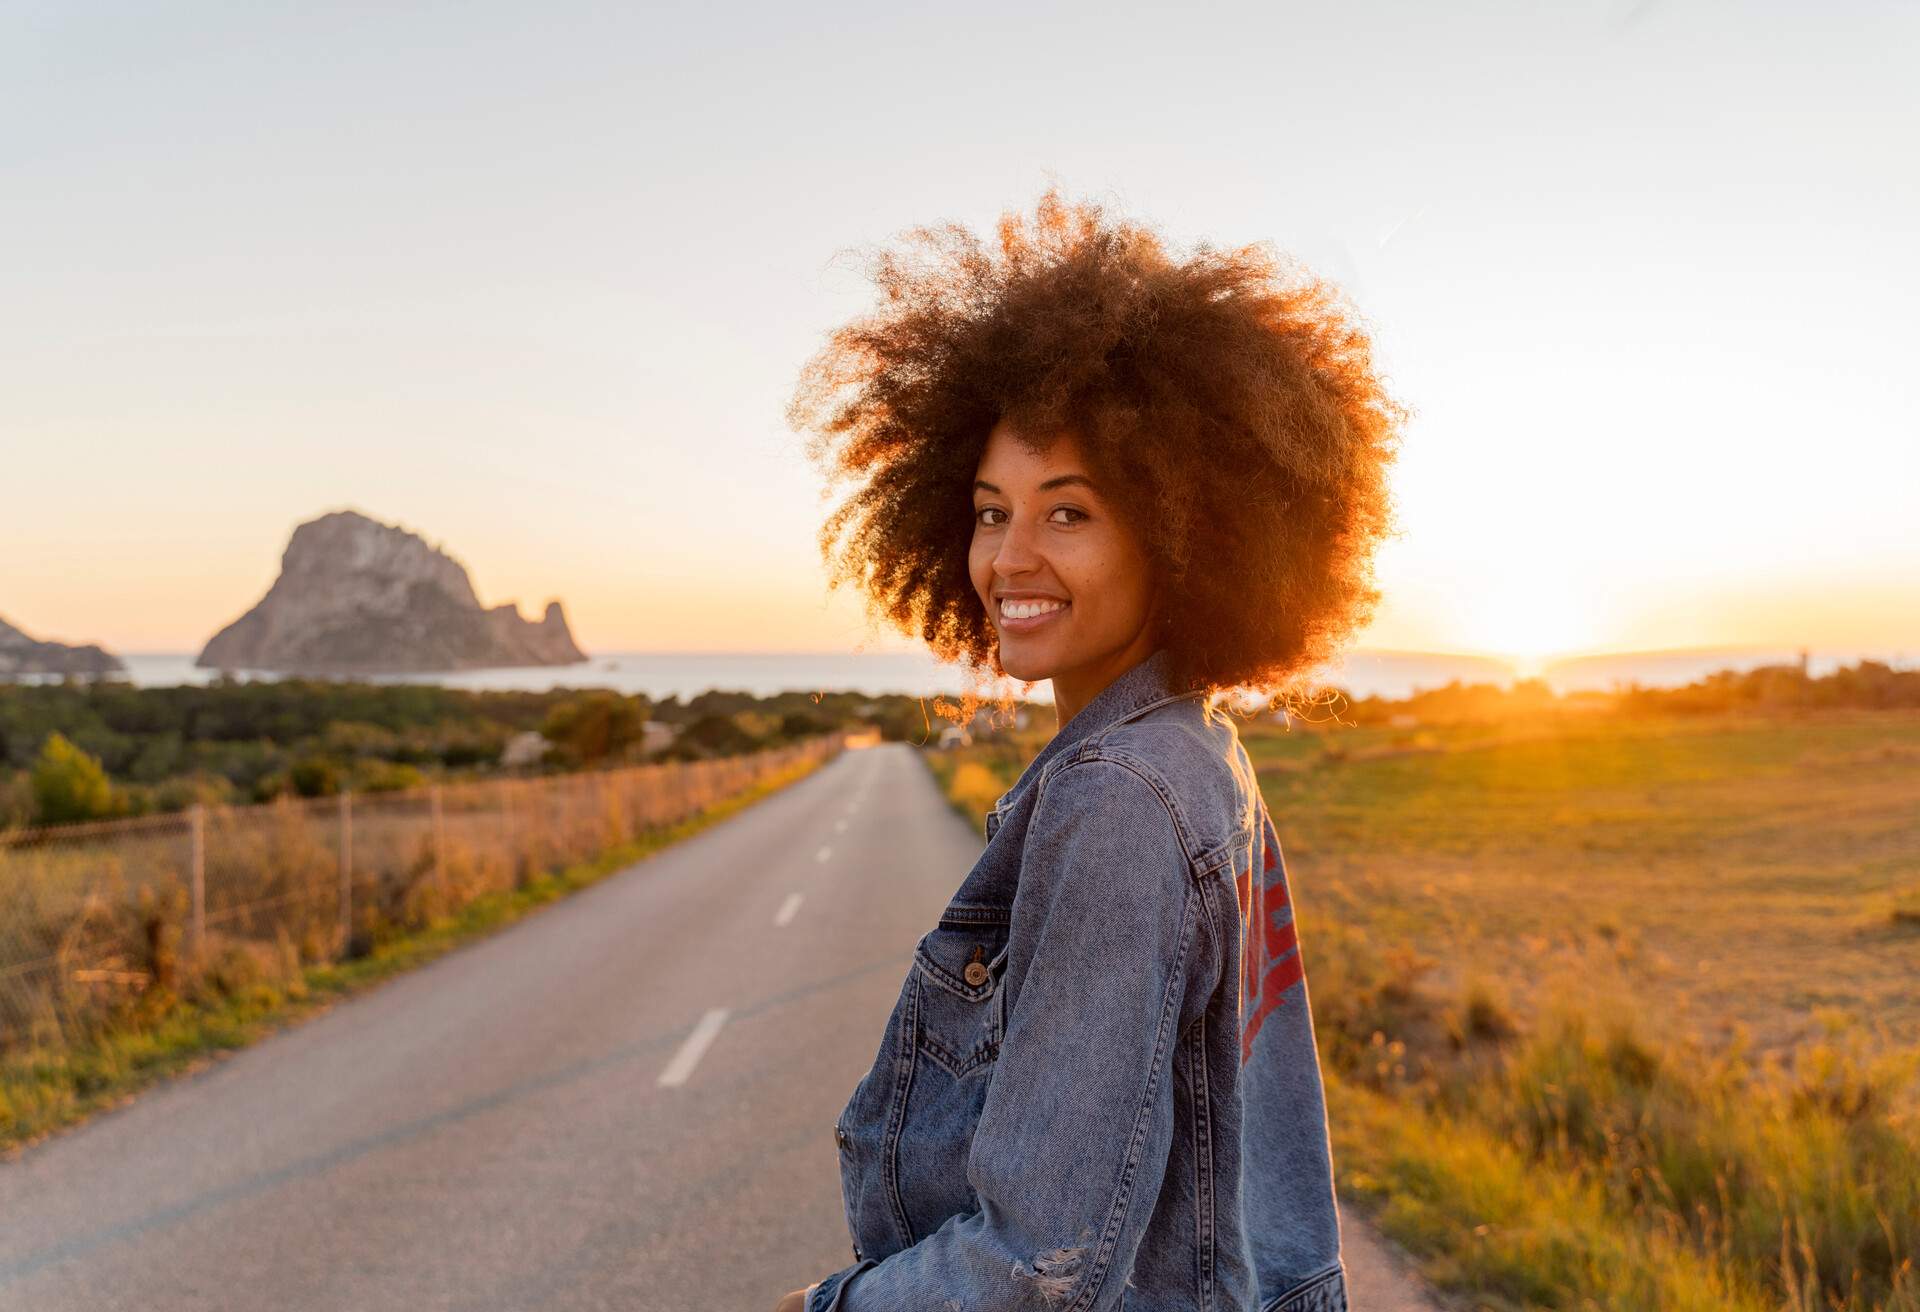 A young woman with beautiful afro-textured hair stands on the road in front of a sunset, surrounded by grassy areas, wearing a stylish denim jacket.